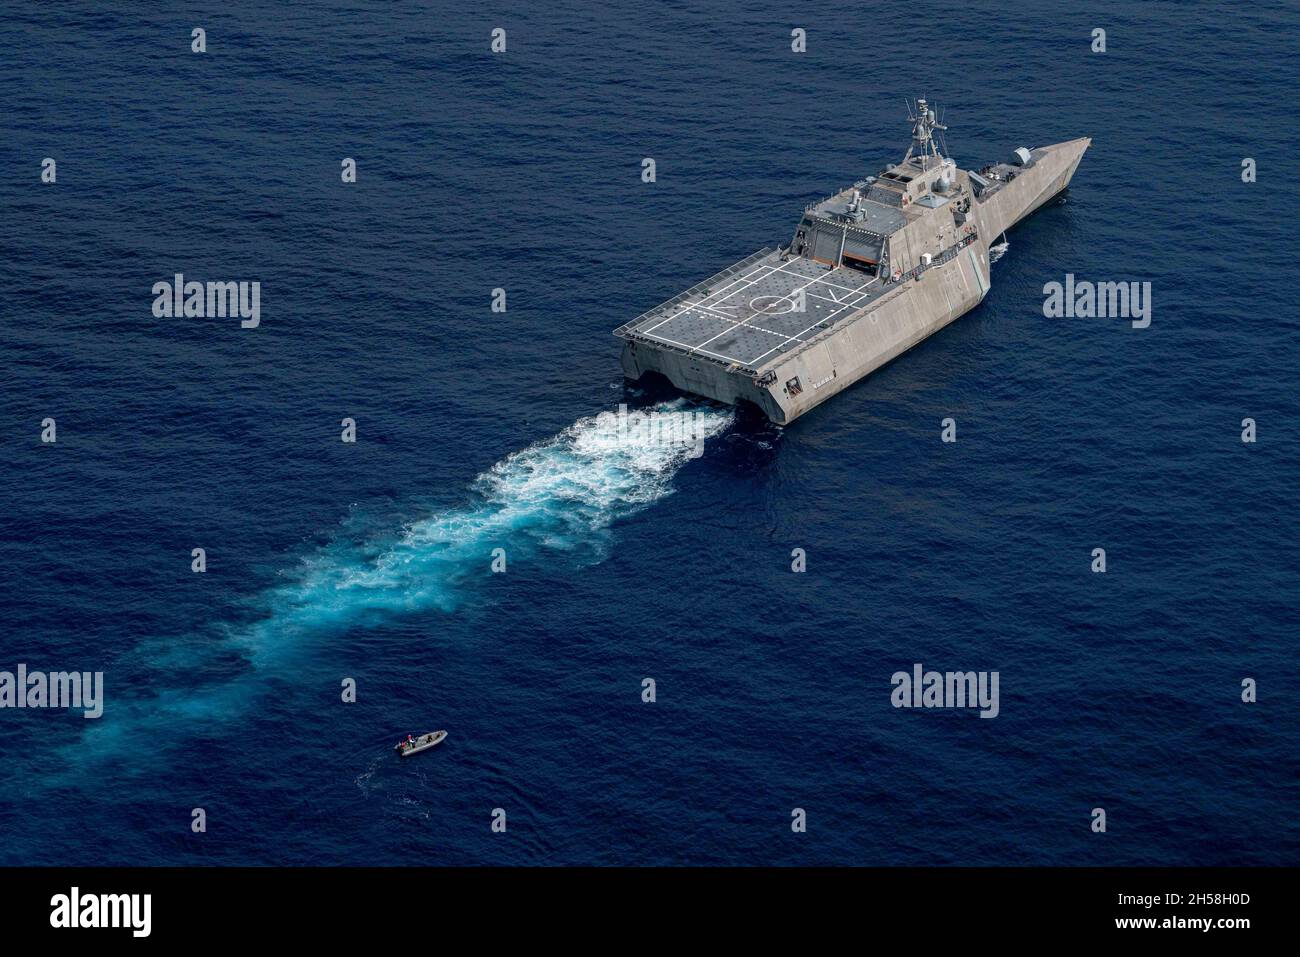 South China Sea, United States. 01 November, 2021. The U.S. Navy Independence-variant littoral combat ship USS Jackson during rigid-hulled inflatable boat search and rescue exercises November 1, 2021 in the the South China Sea.  Credit: MC3 Andrew Langholf/US Navy/Alamy Live News Stock Photo